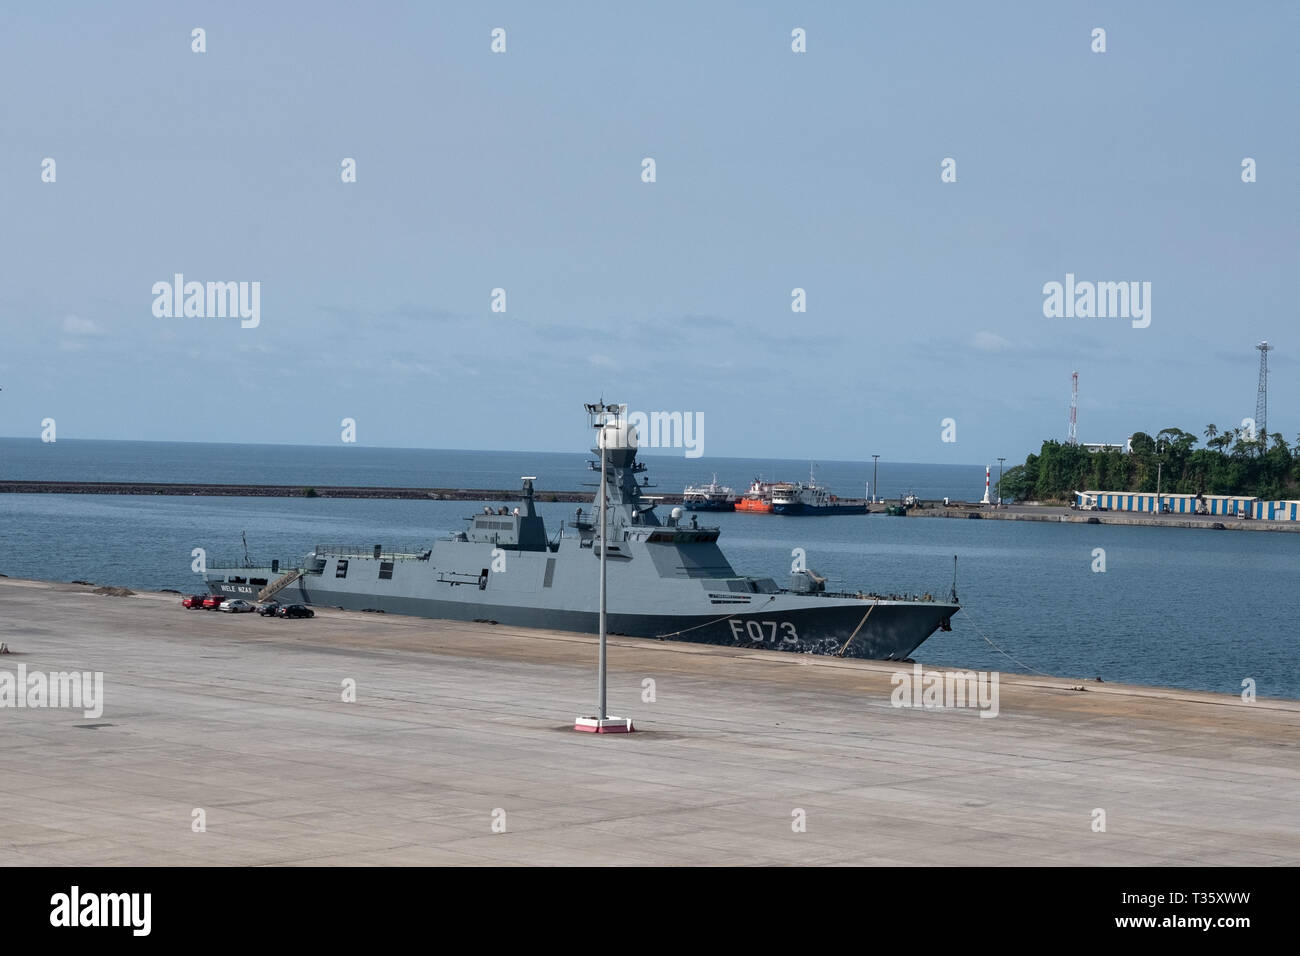 The flagship of the Equatorial Guinea navy alongside a dock in the harbour in Malabo, the capital Stock Photo